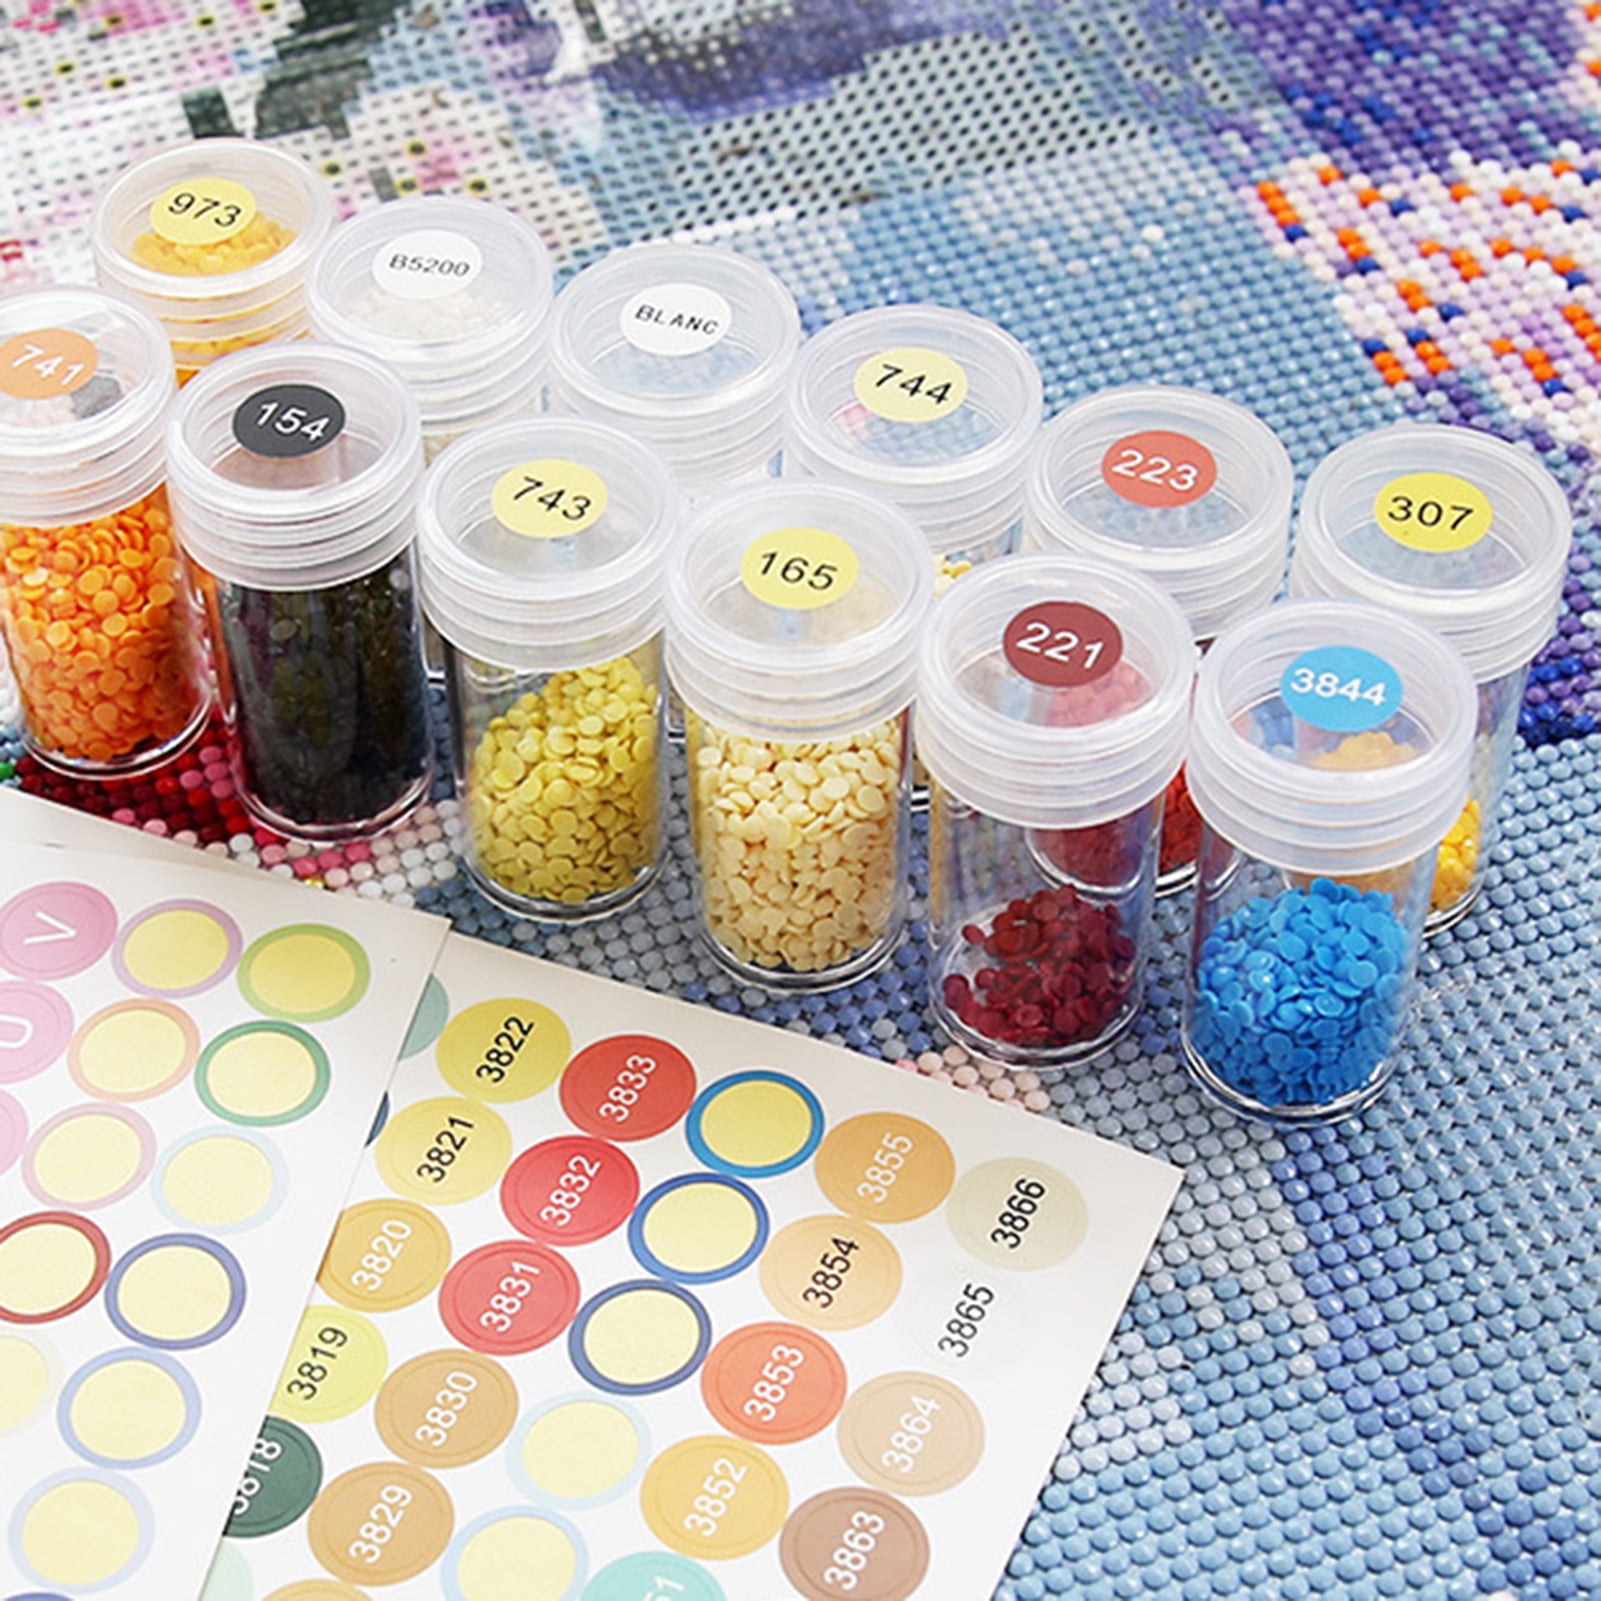 YBUTVY 5D Diamond Painting Beads - 447 Colors 447000 Pcs Round Diamond Accessories Replacement for Missing Drills for DIY Cra